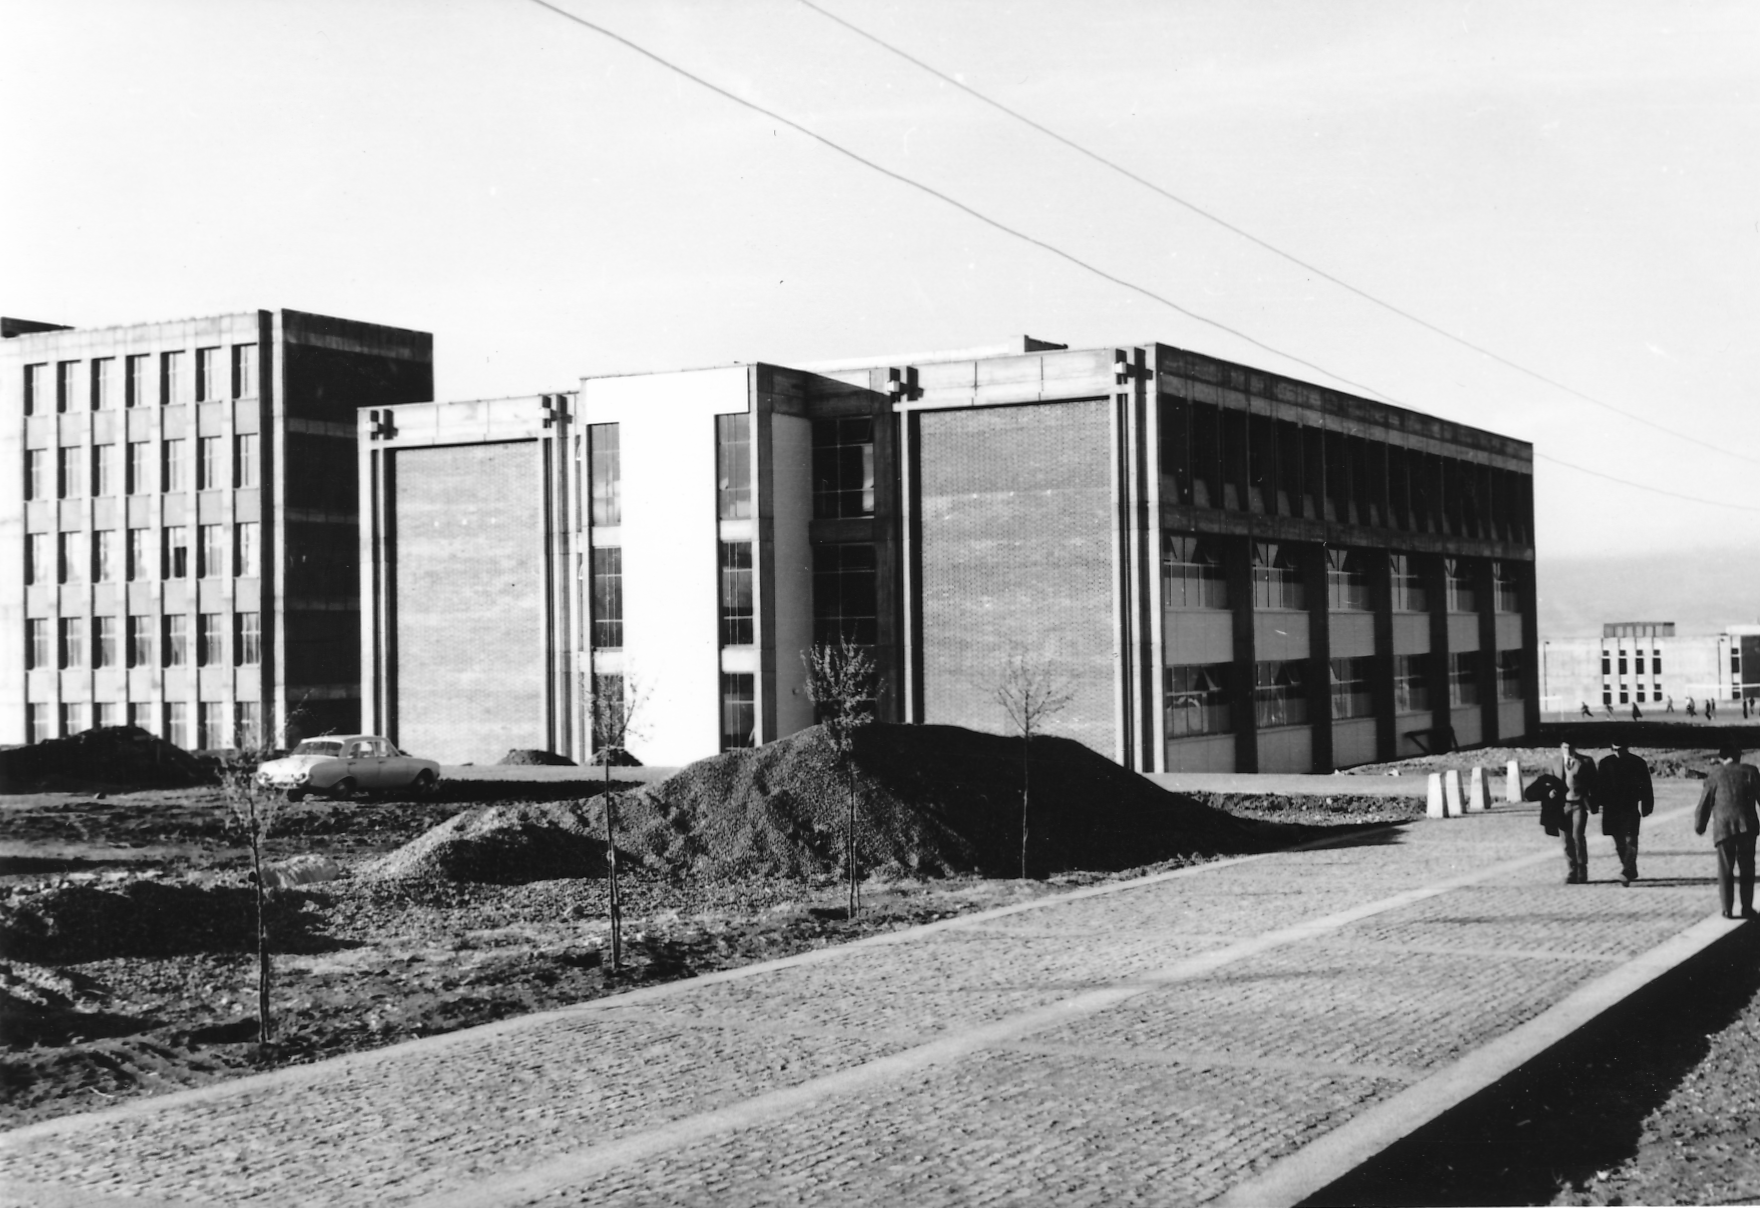 The construction of the central classrooms block (1965)